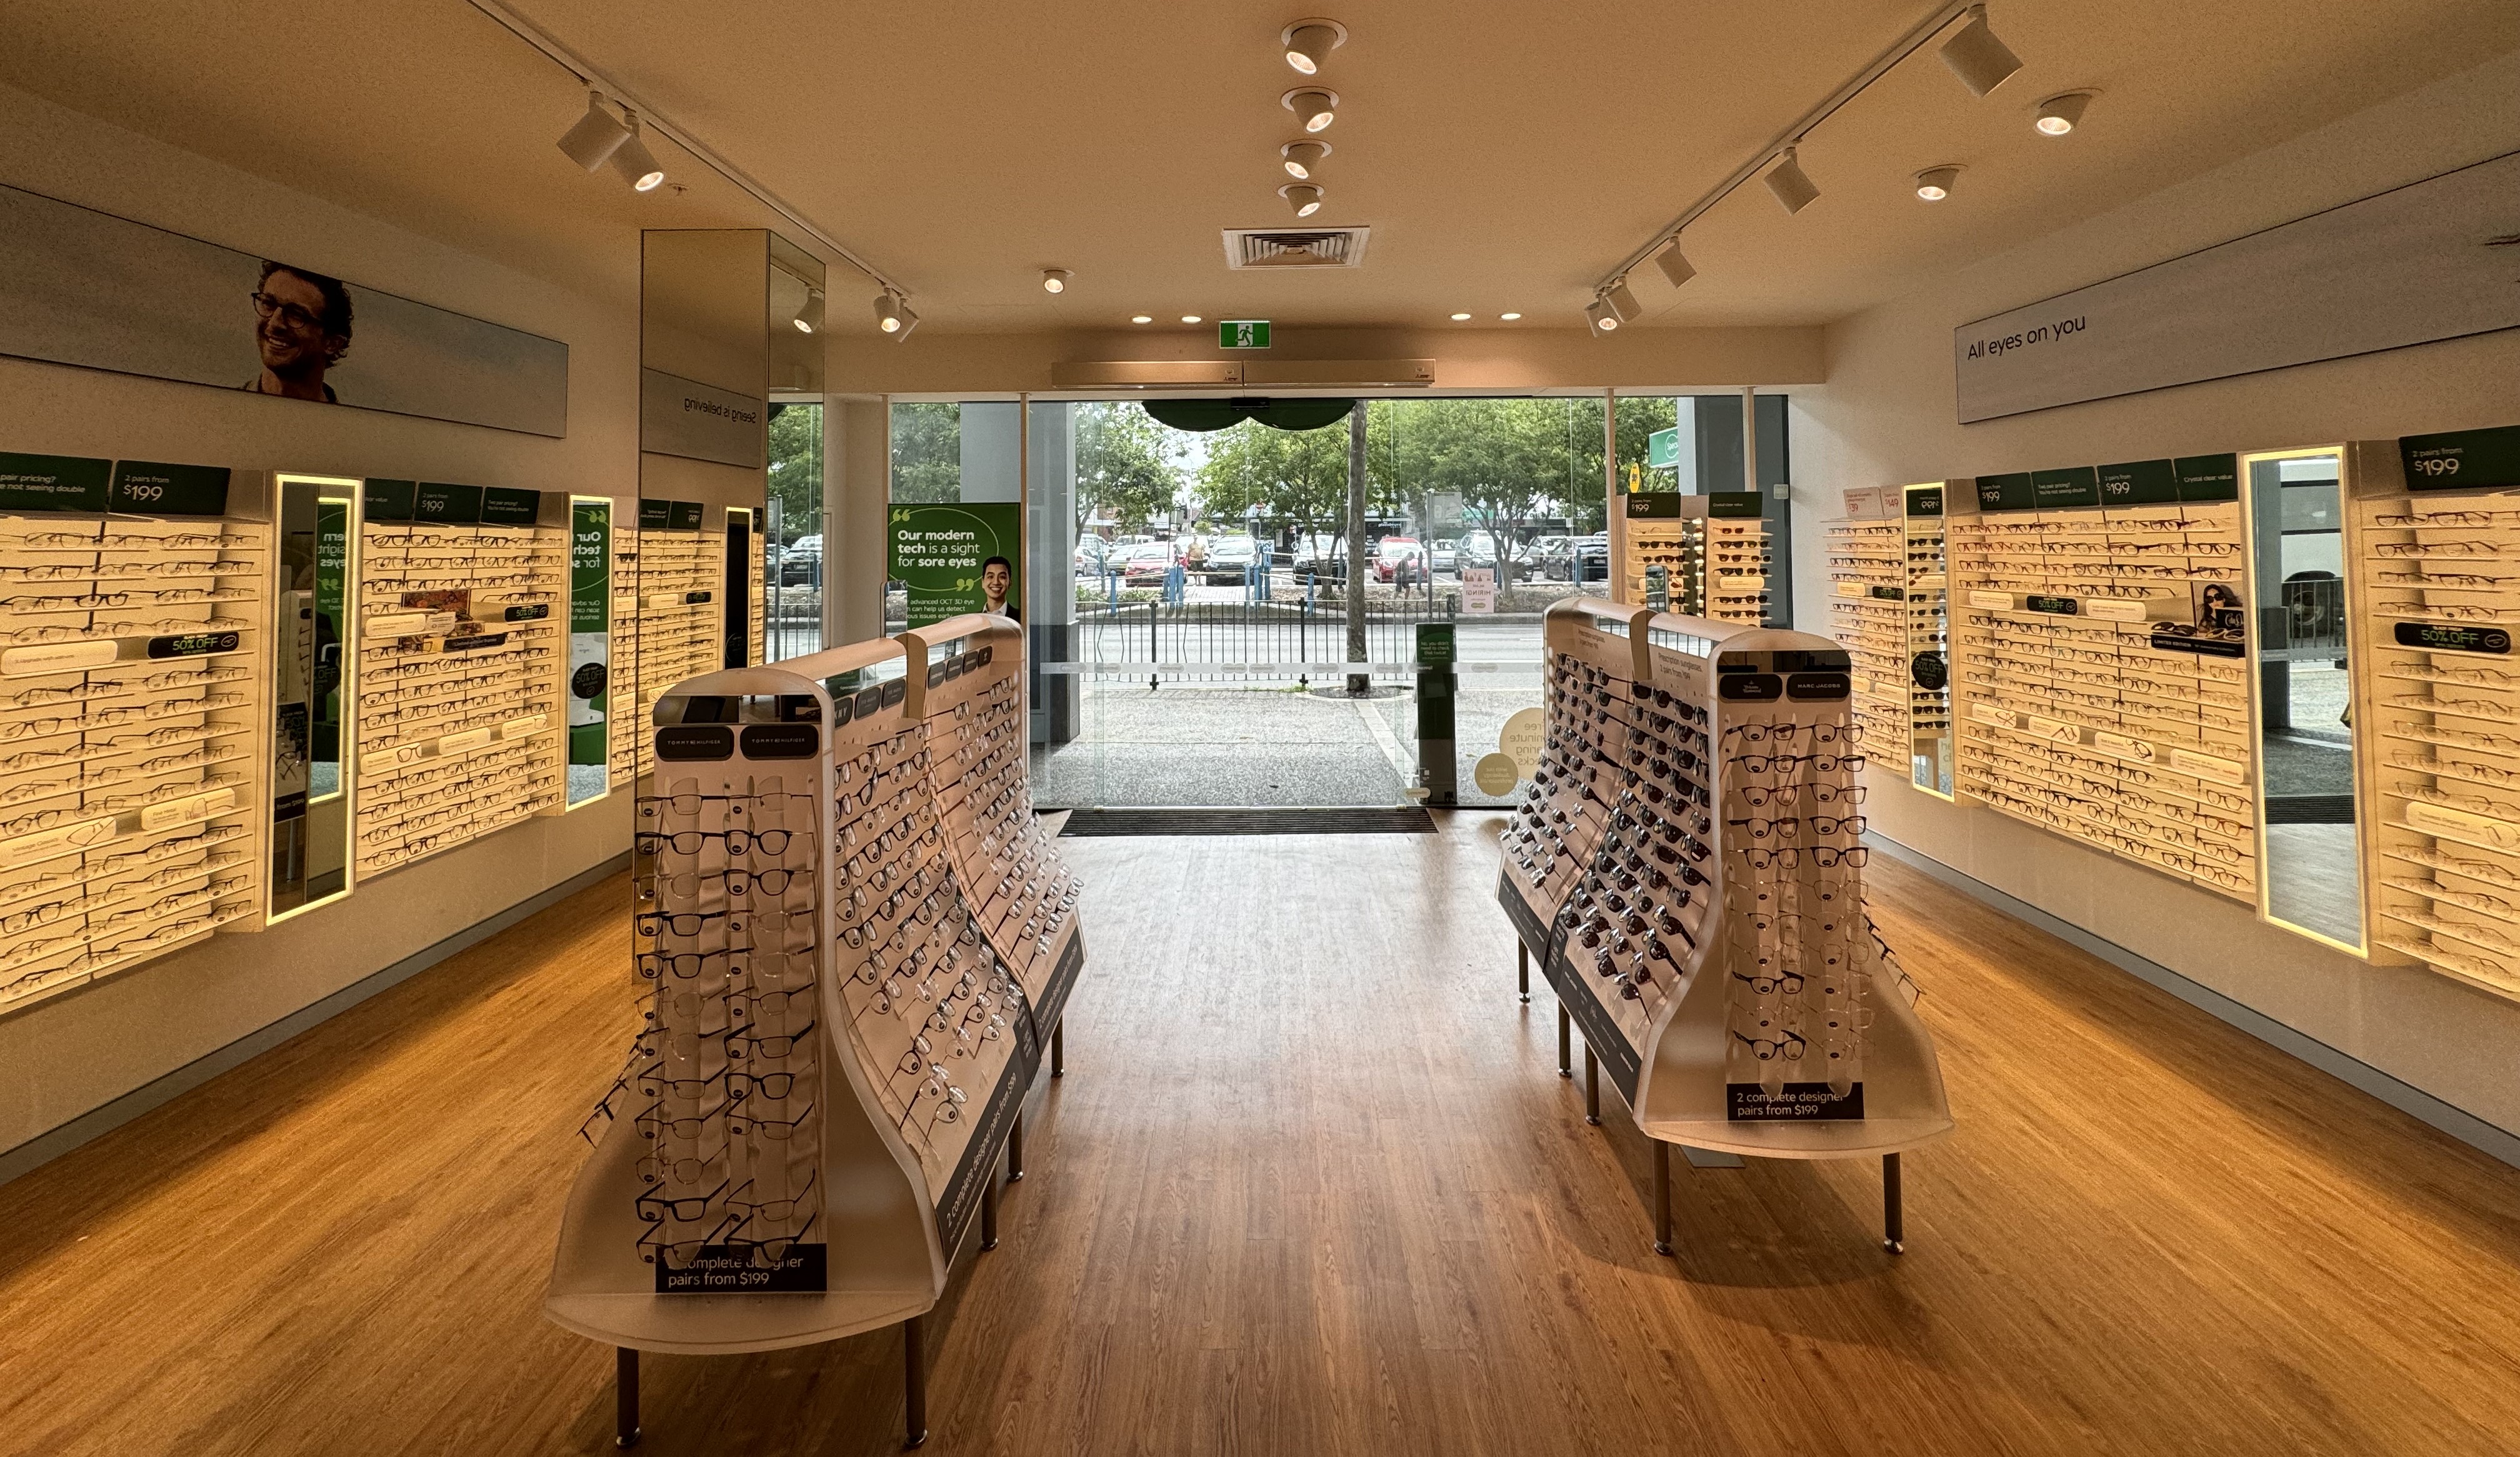 Images Specsavers Optometrists & Audiology - Maroubra